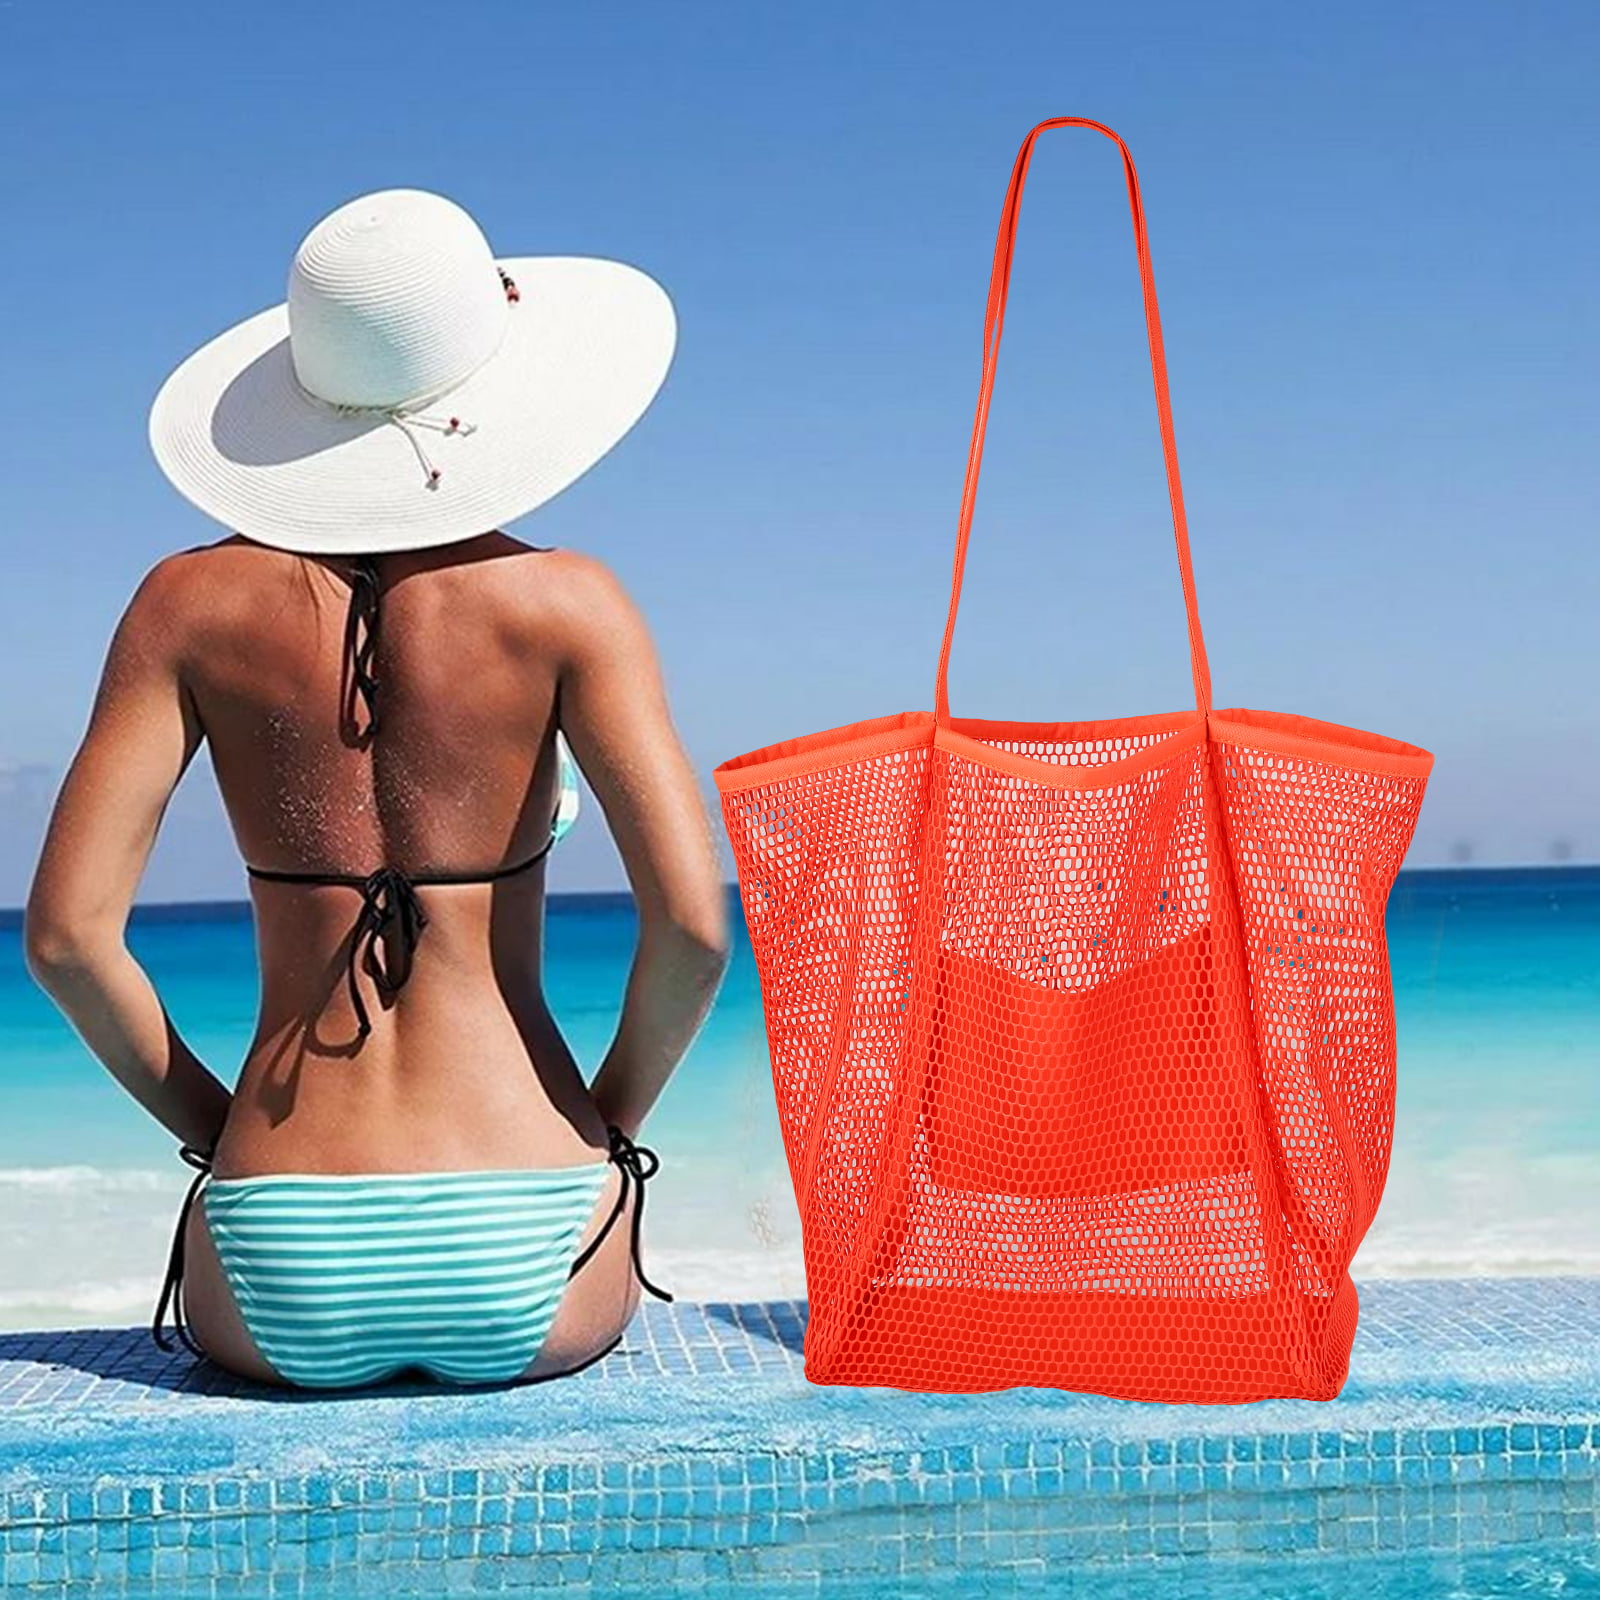 Fasrom Extra Large Mesh Beach Bag with Zipper Bottom, Oversized Beach Tote Bag for Beach or Pool Trip (Patent Design)